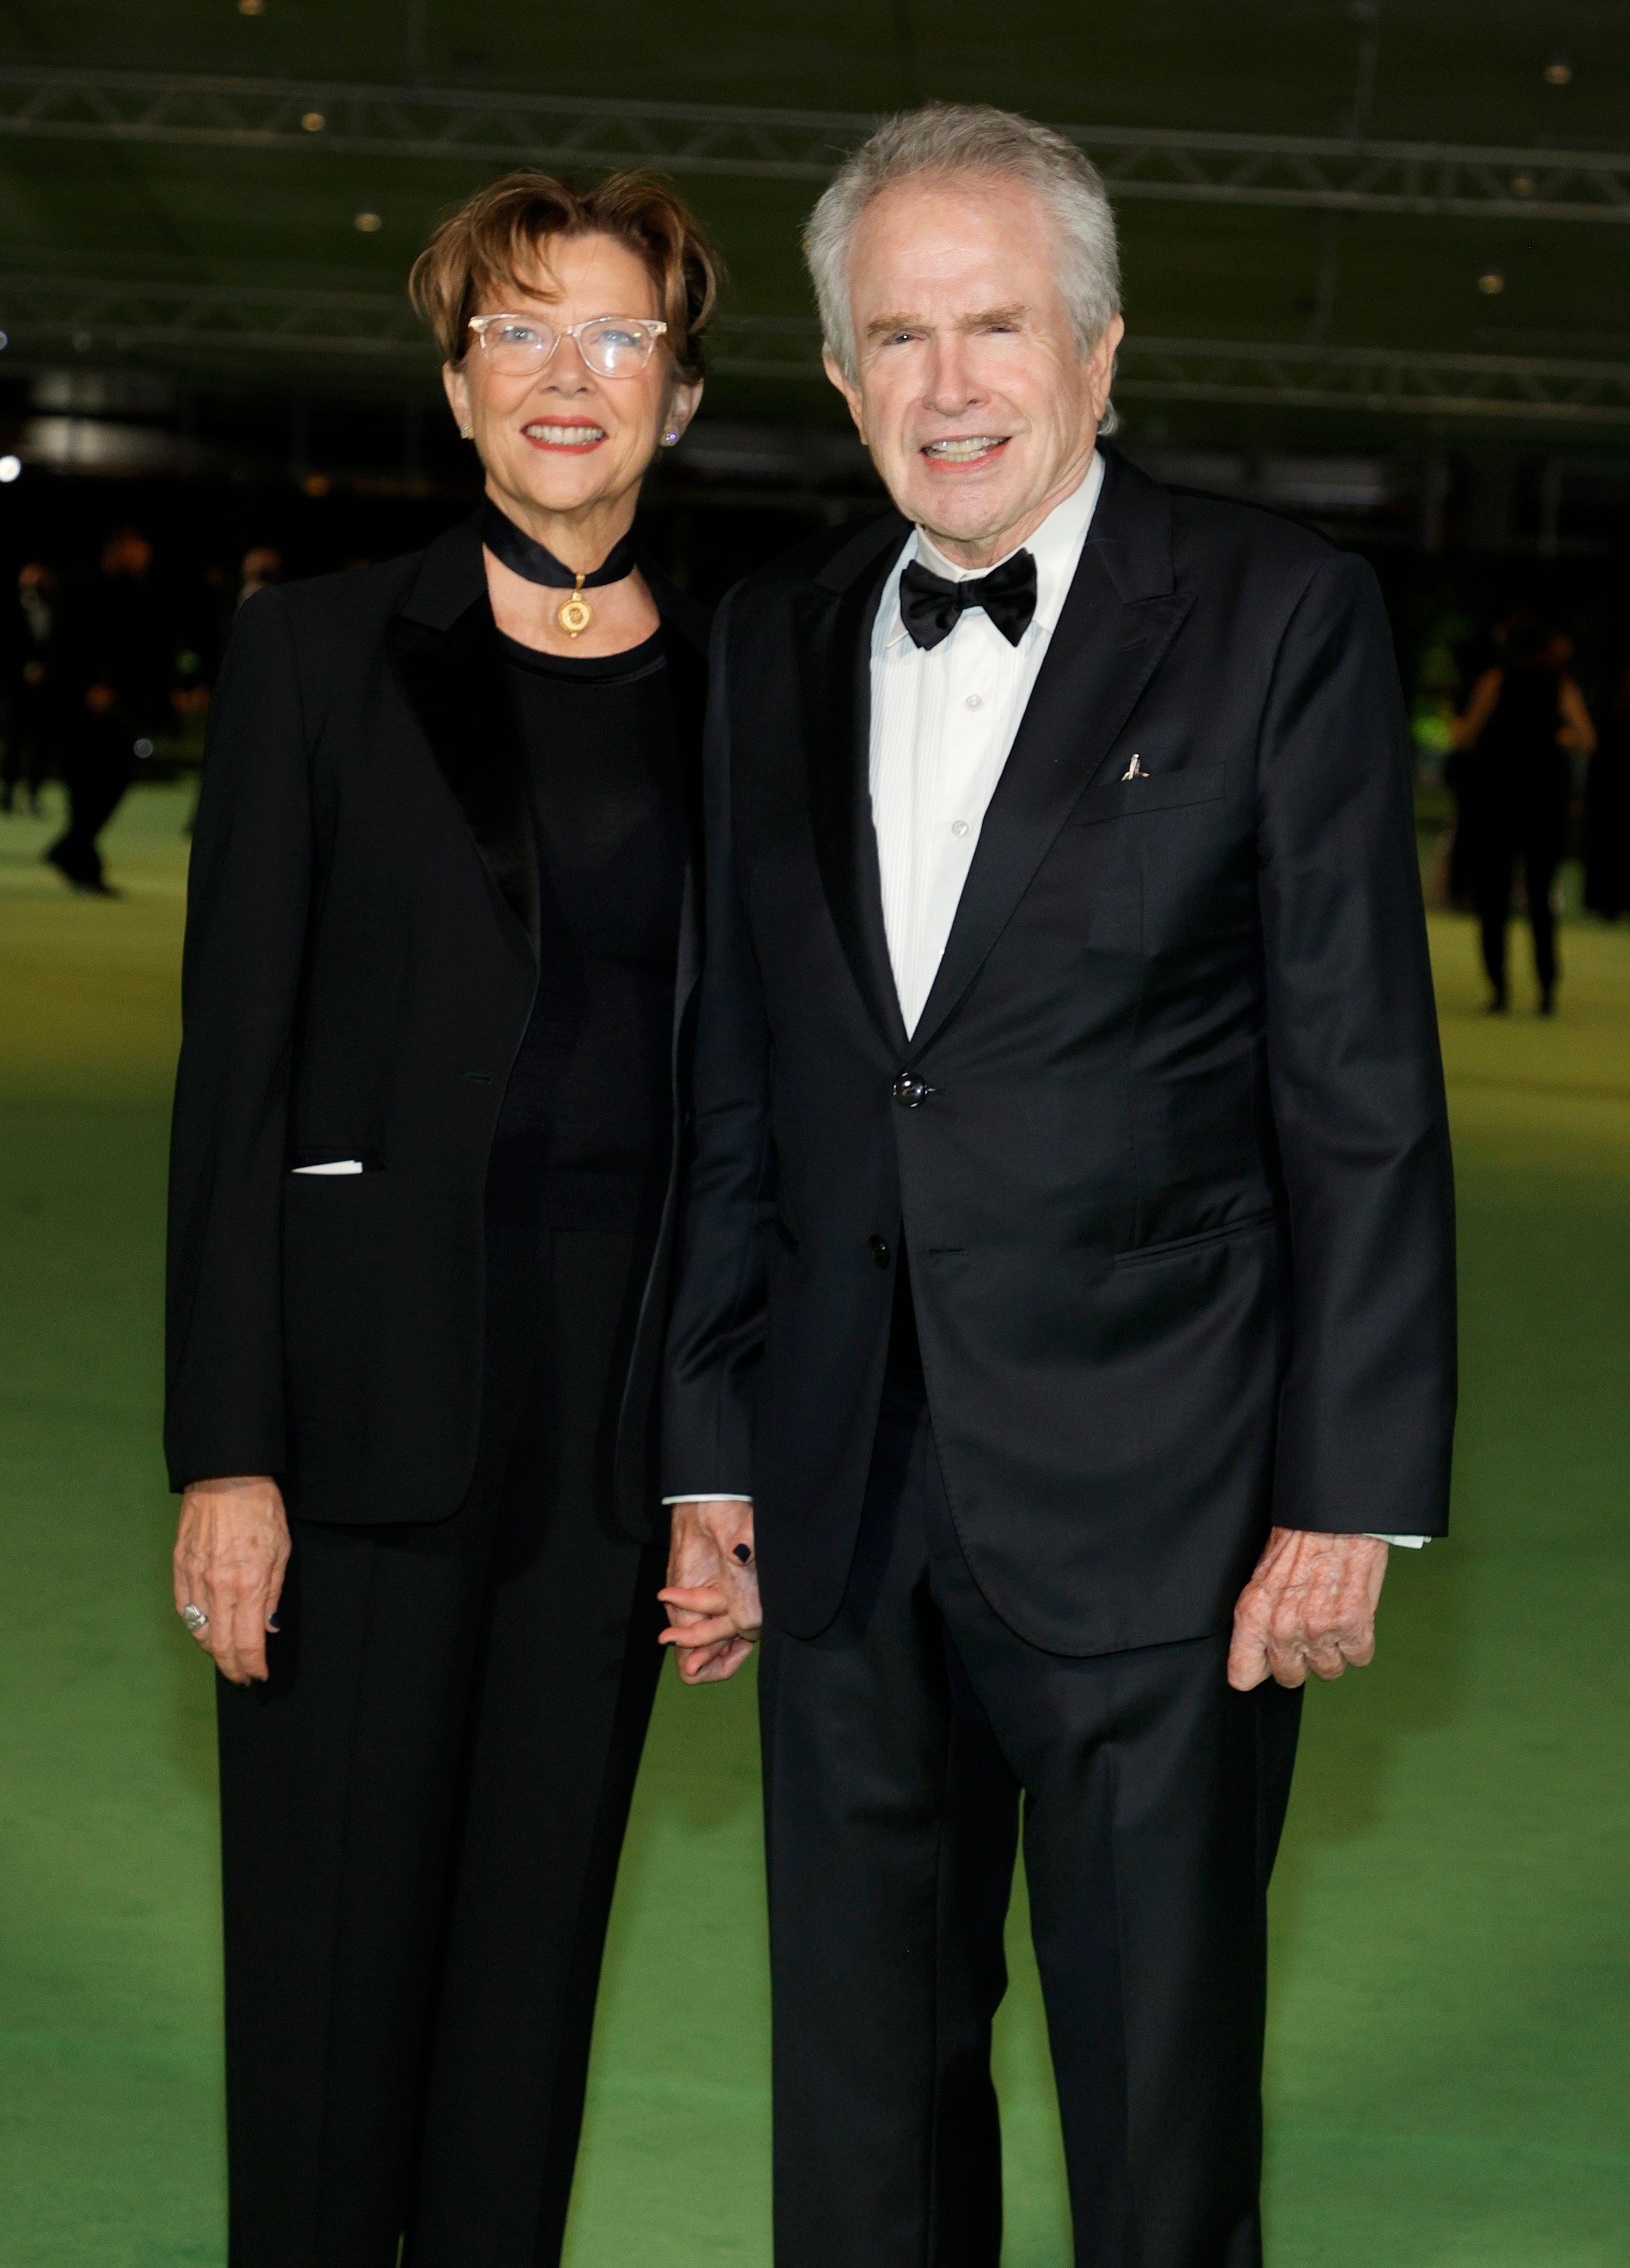 Annette Bening and Warren Beatty attend the Academy Museum of Motion Pictures Opening Gala